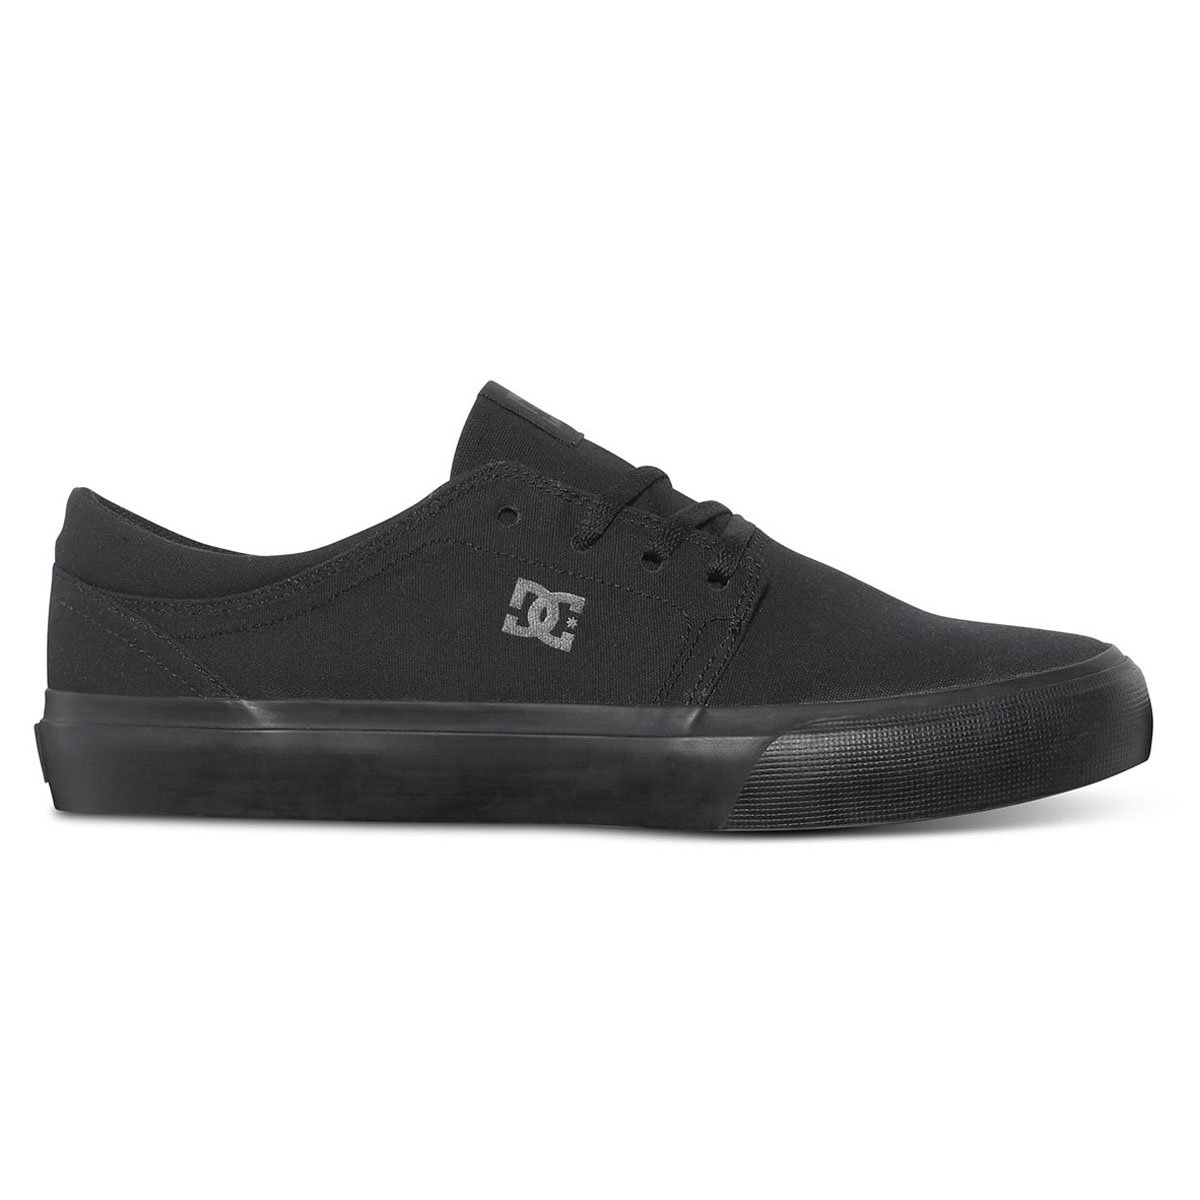 Tenis Casual Trase Tx Dc Shoes - Caballero